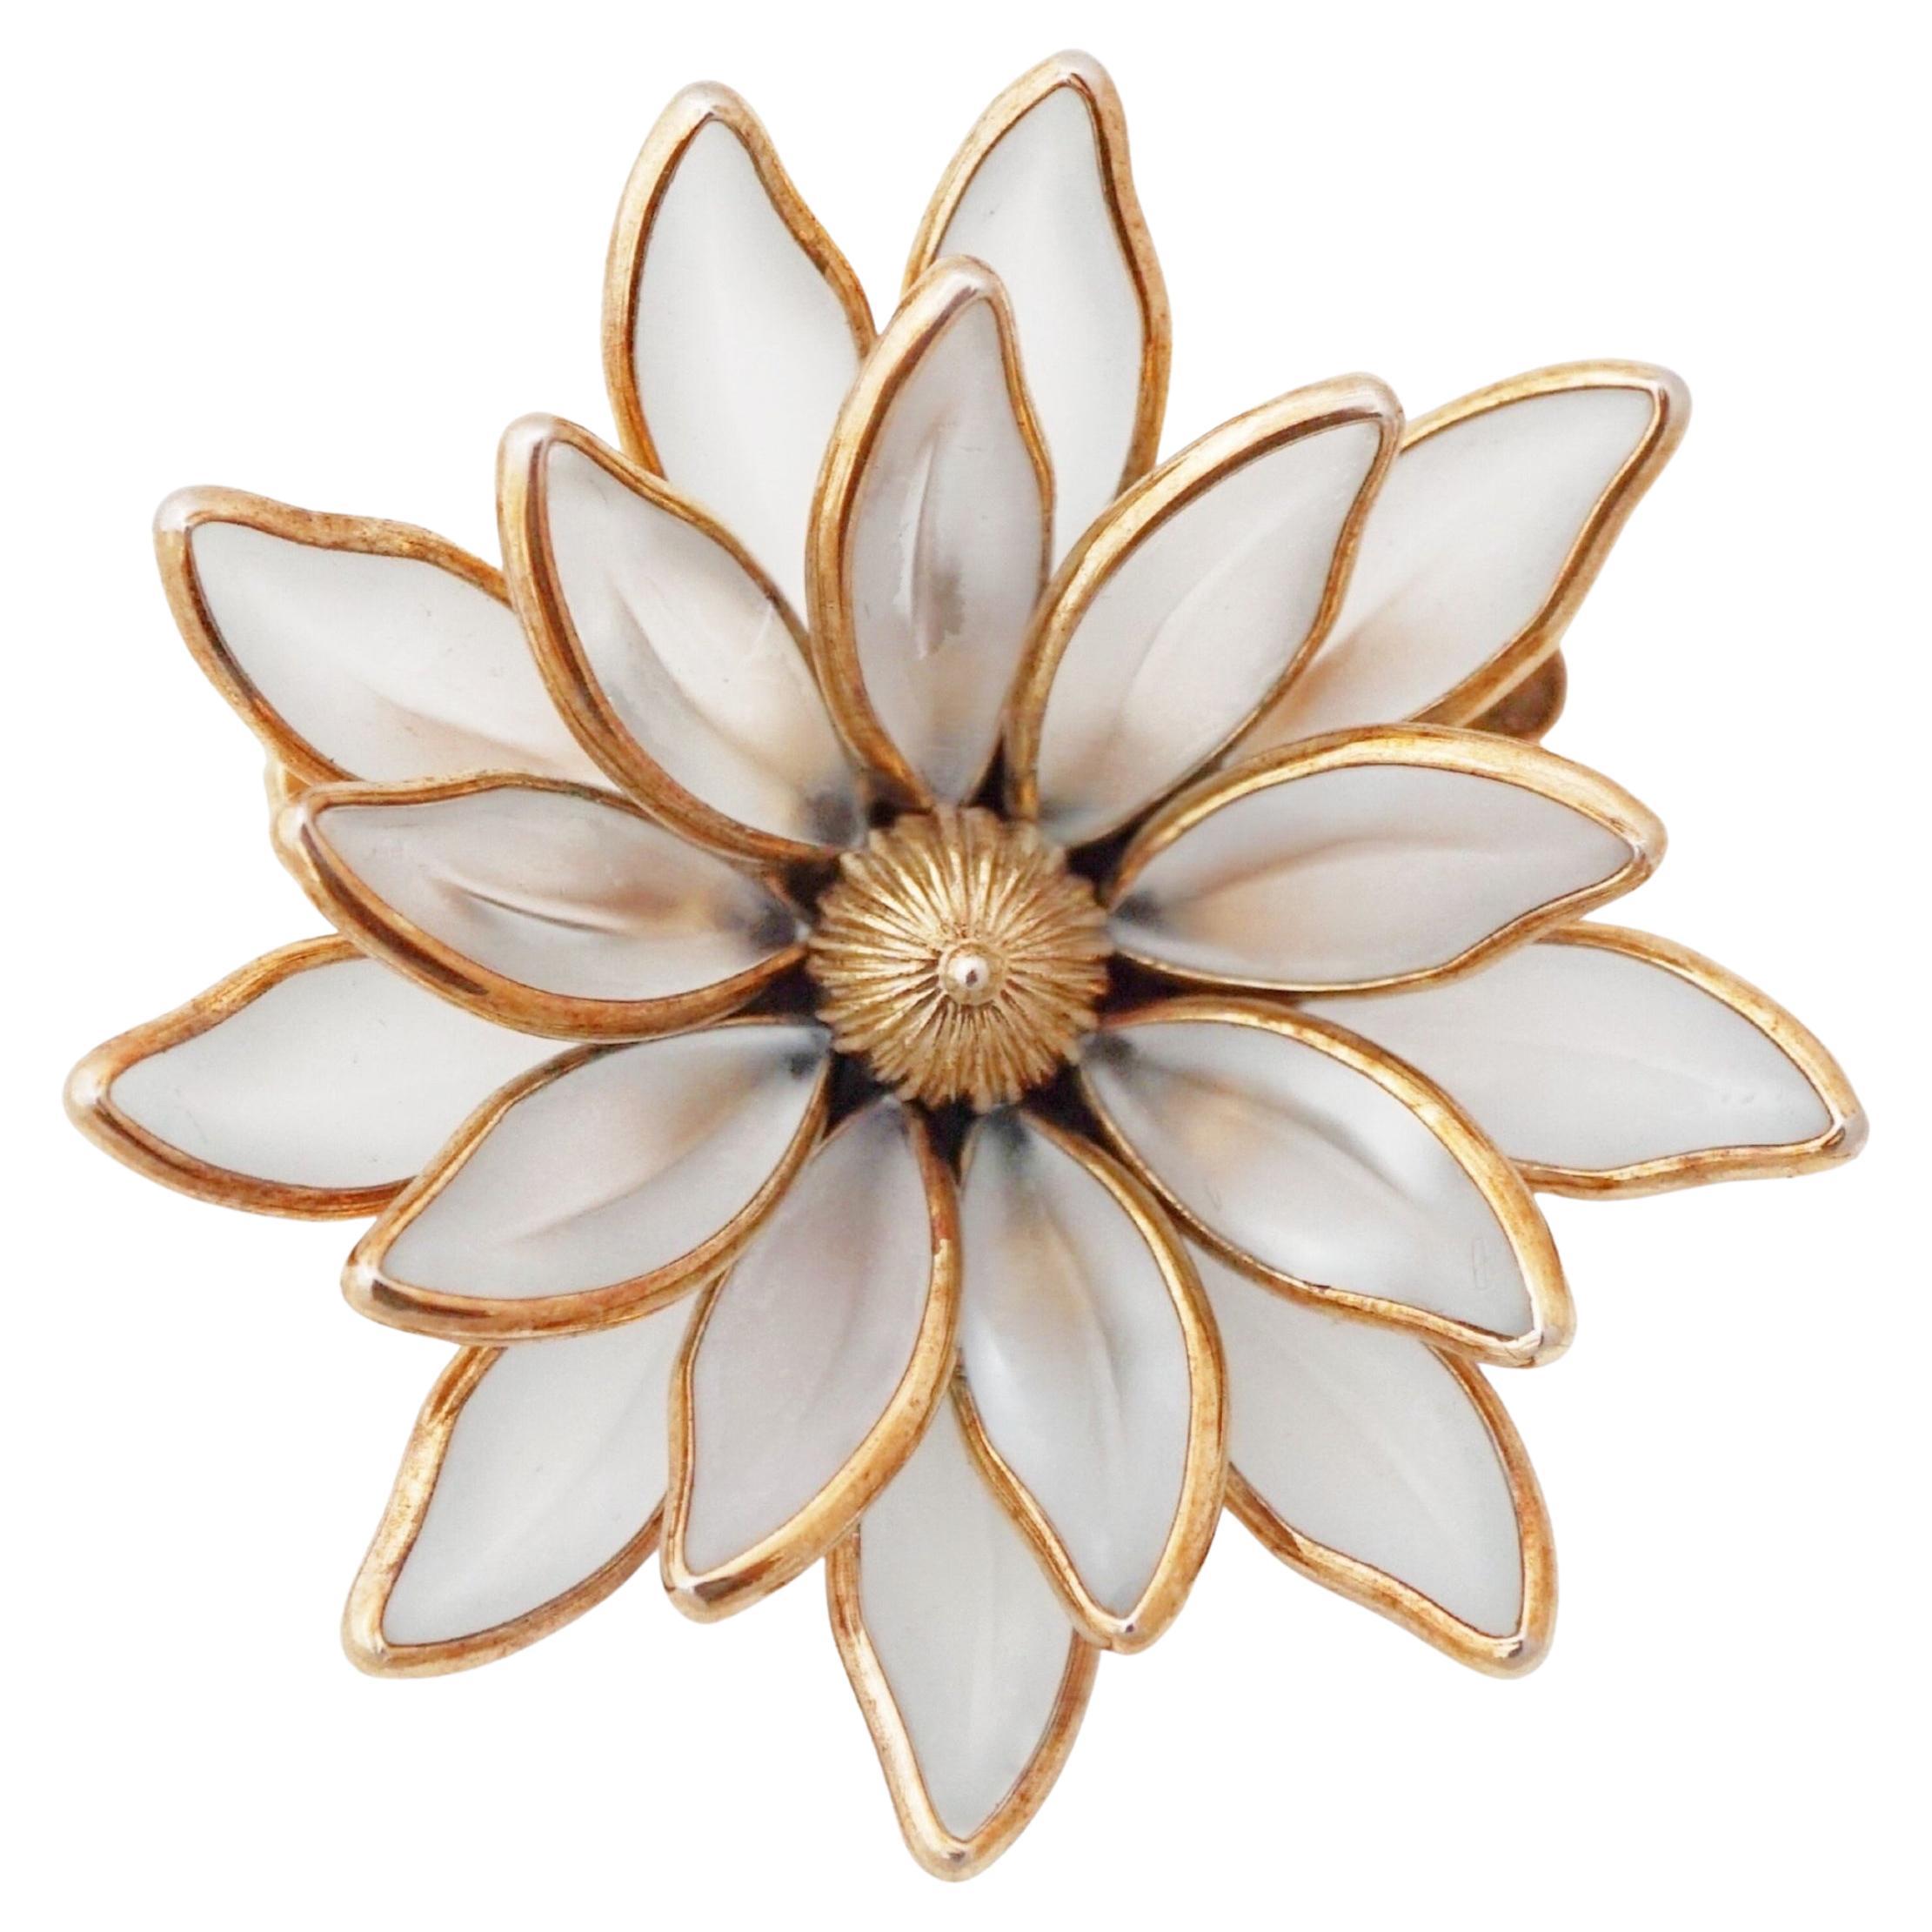 Layered Flower Poured Frosted Glass Dimensional Brooch By Crown Trifari, 1950s